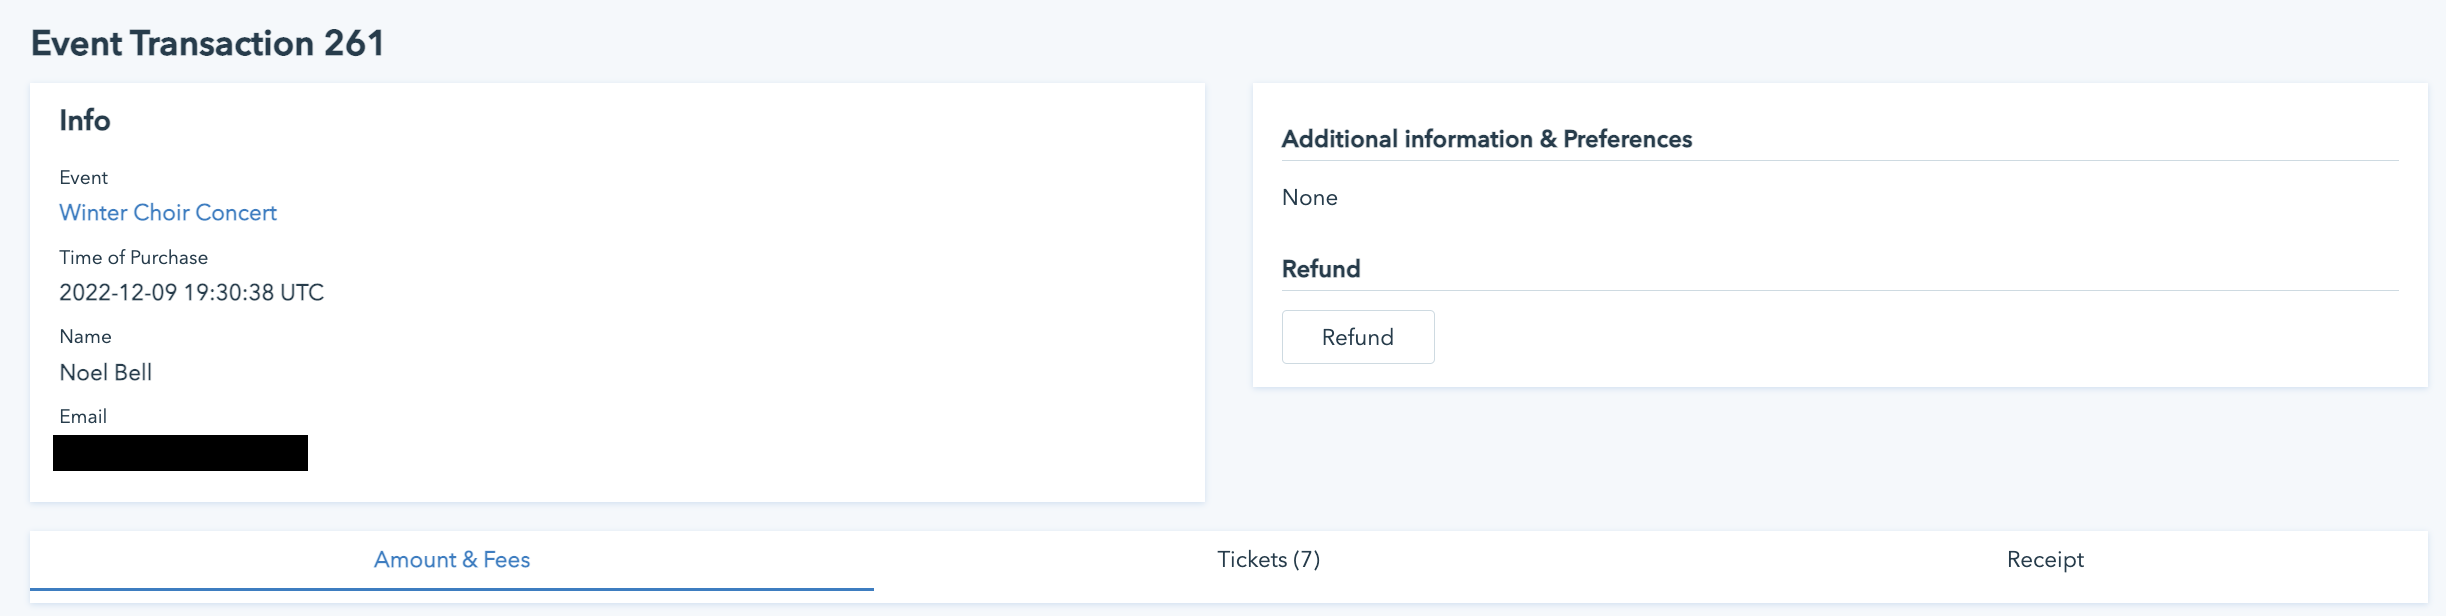 Events ticket transaction details that you can view on the Donorbox dashboard.